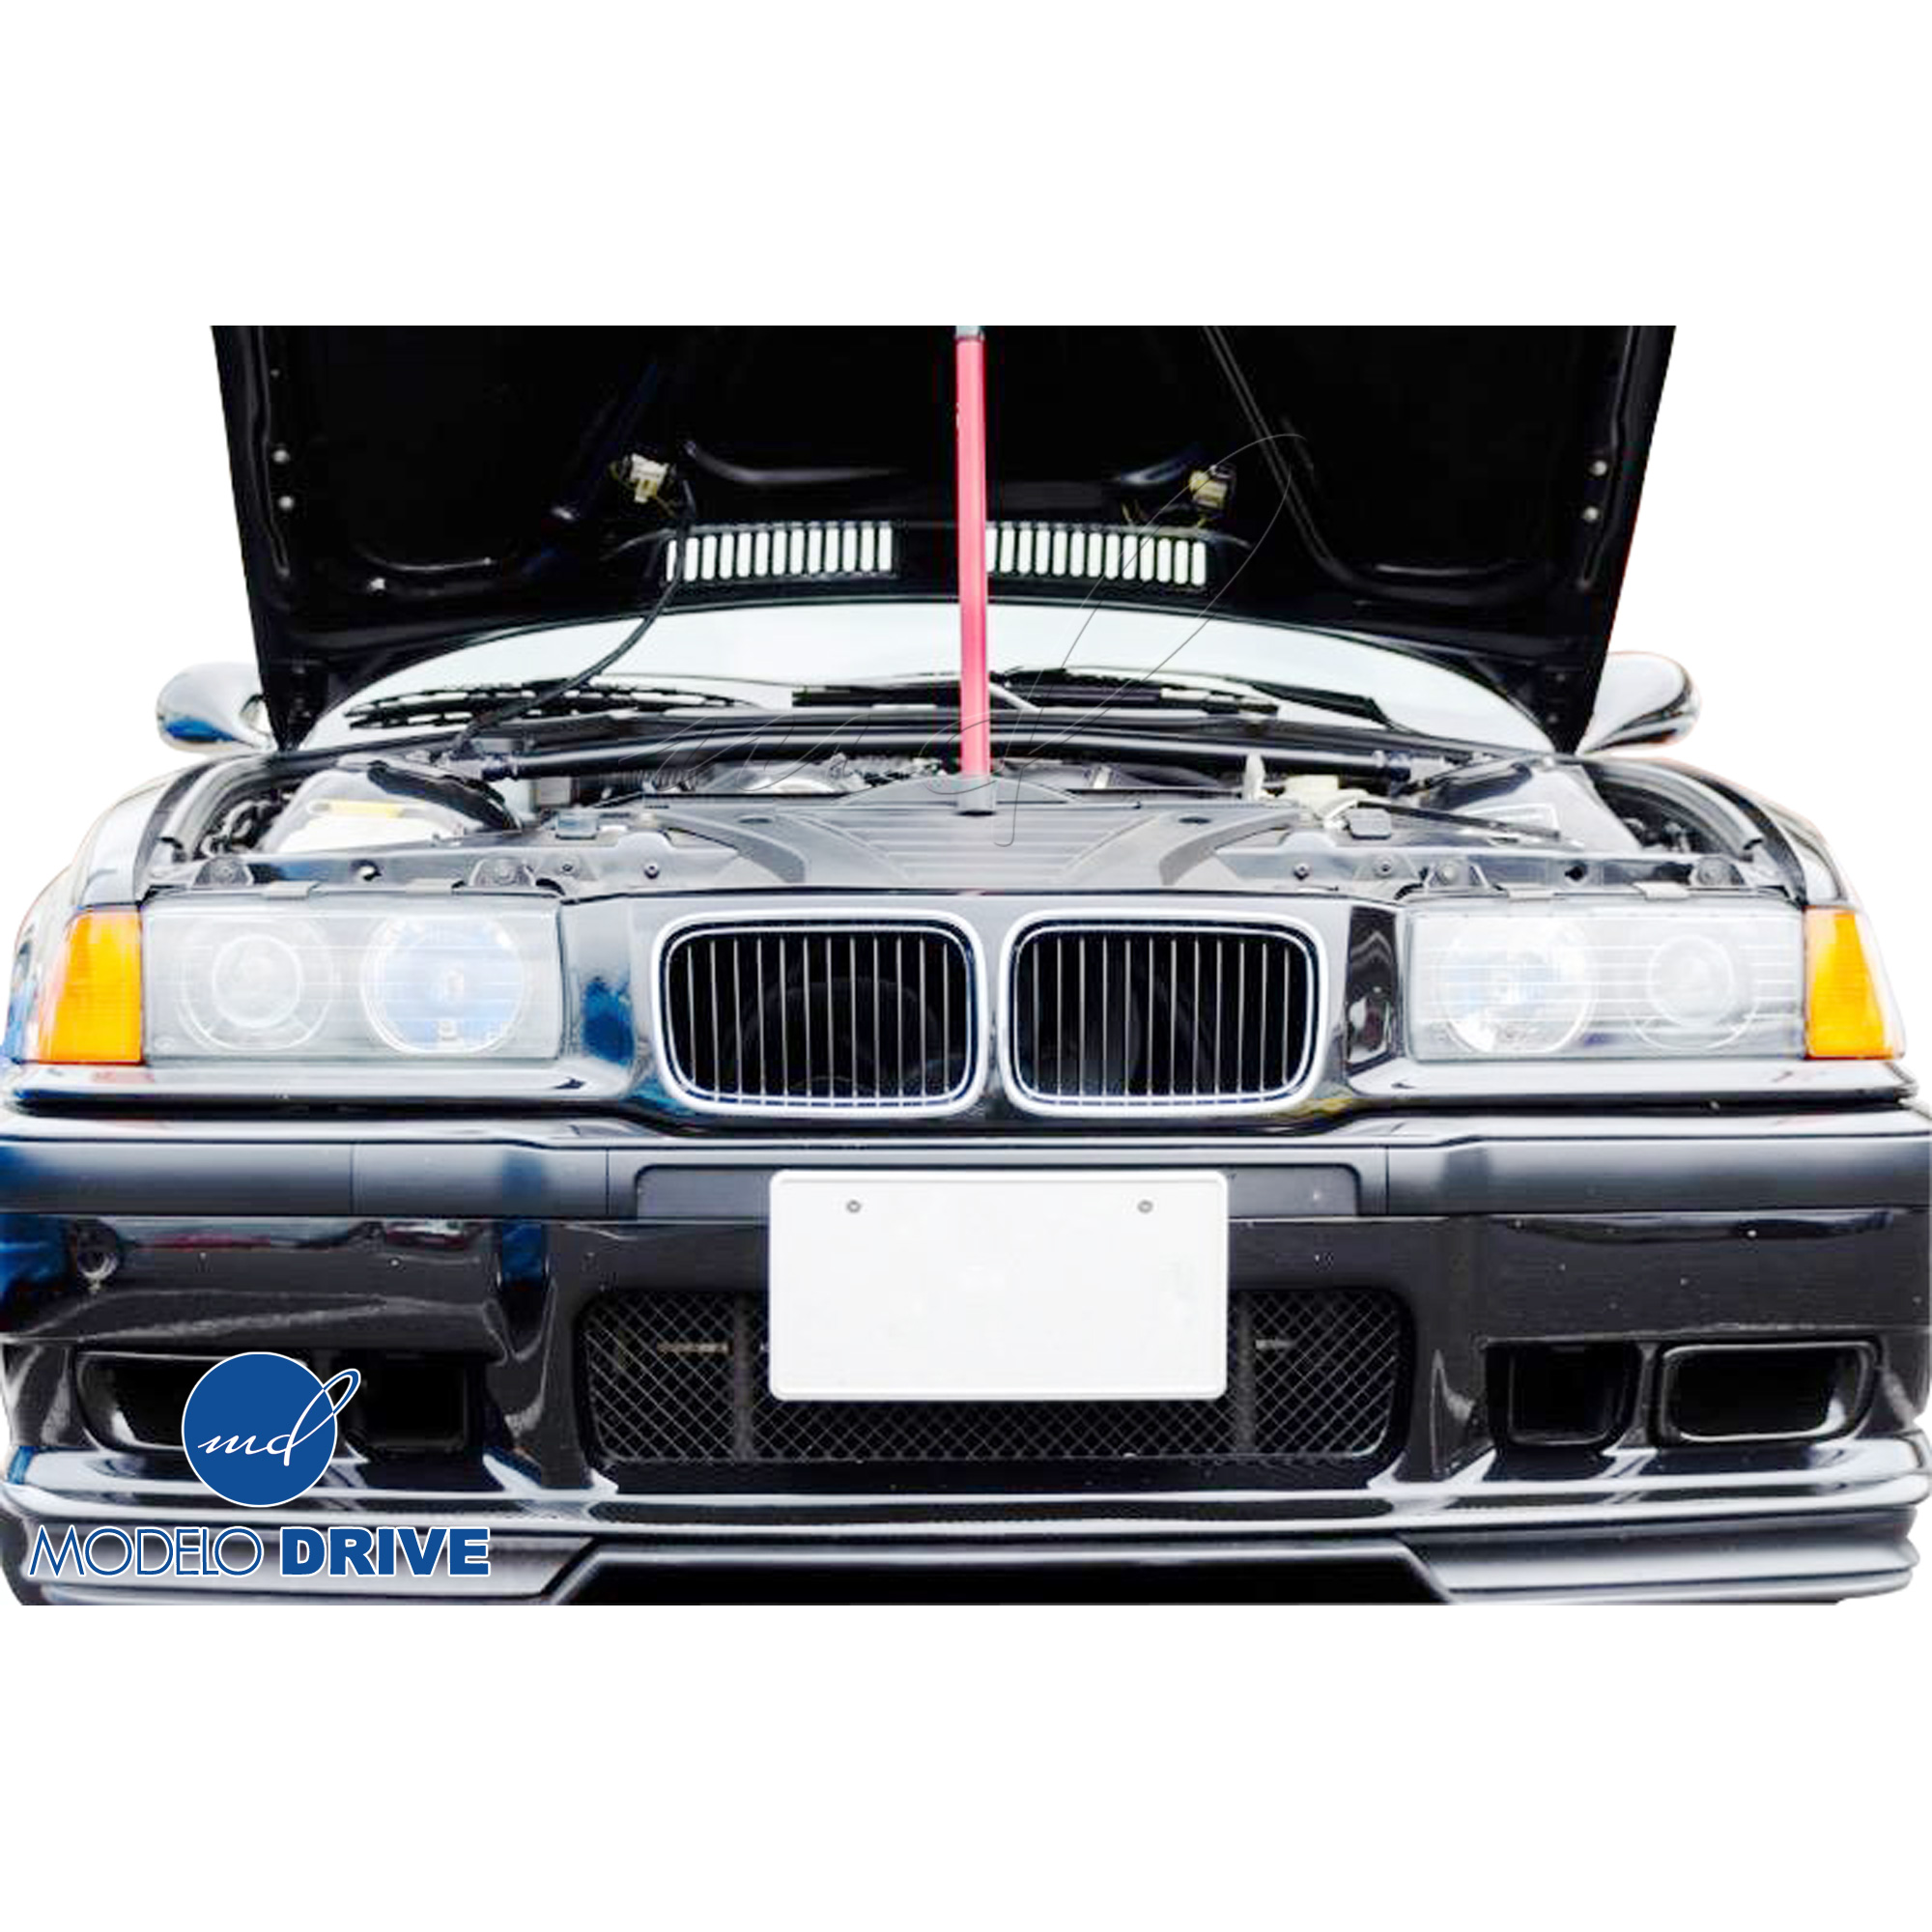 ModeloDrive FRP RIEG GT CUP Front Valance Add-on > BMW M3 E36 1992-1998 > 2dr - Image 2